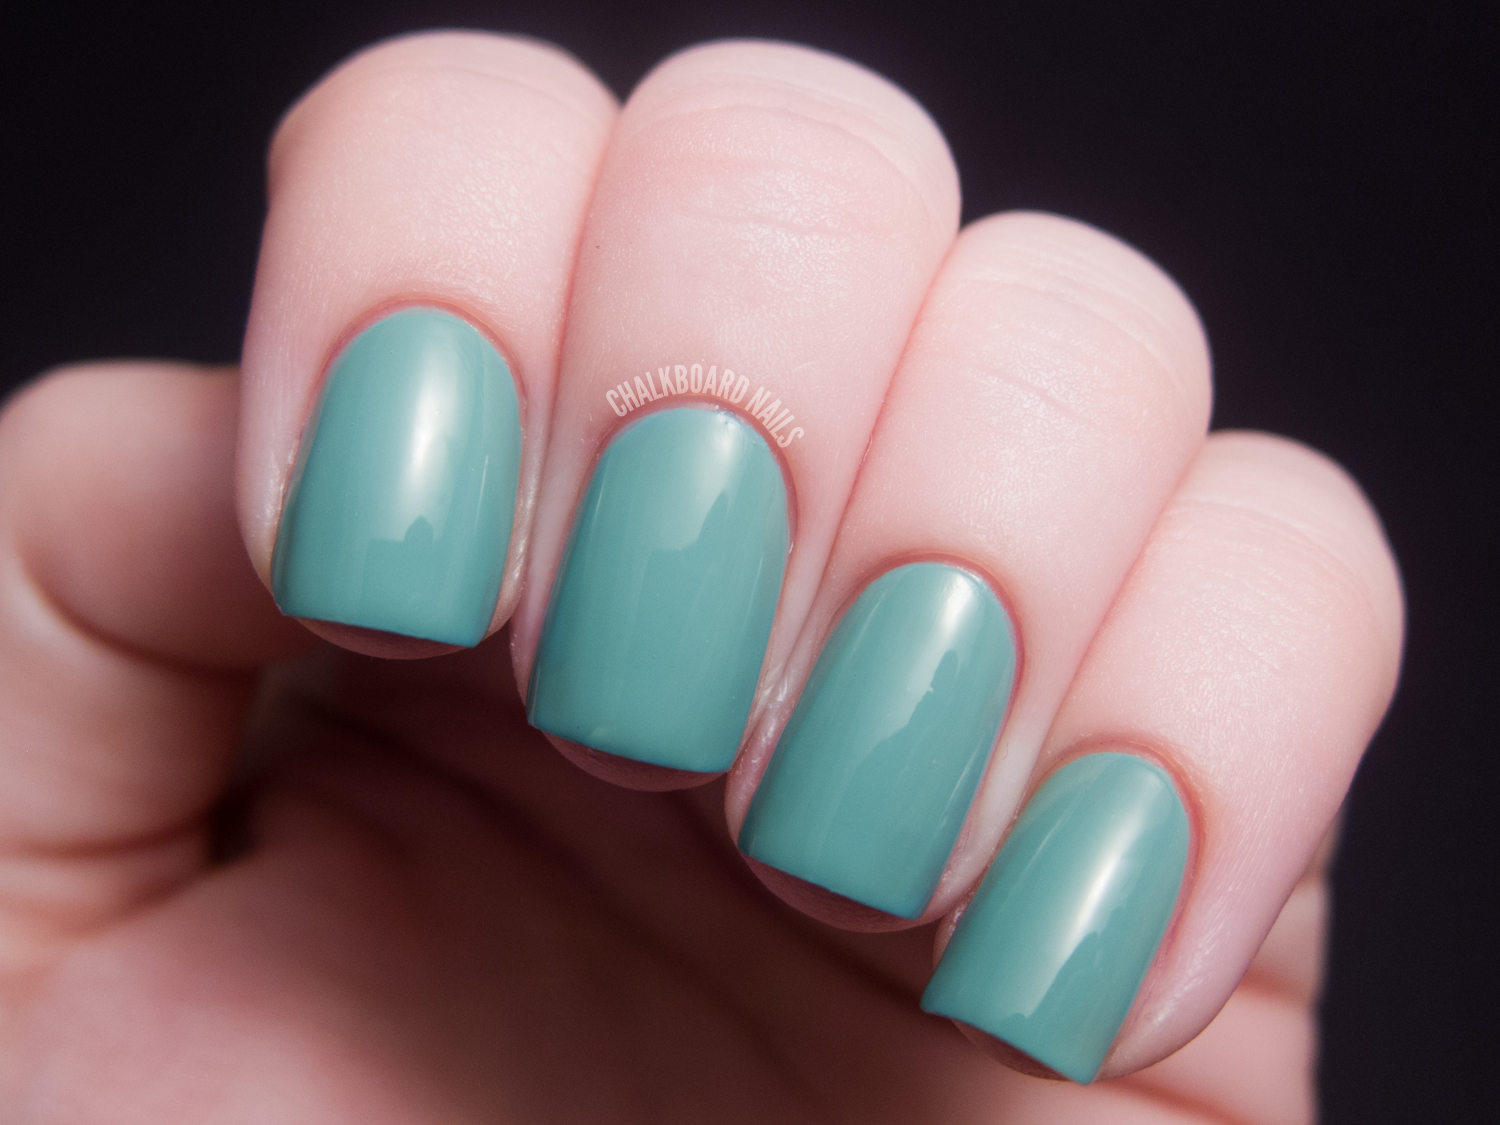 Sheswai Nail Polish in "For Real" Color - wide 6